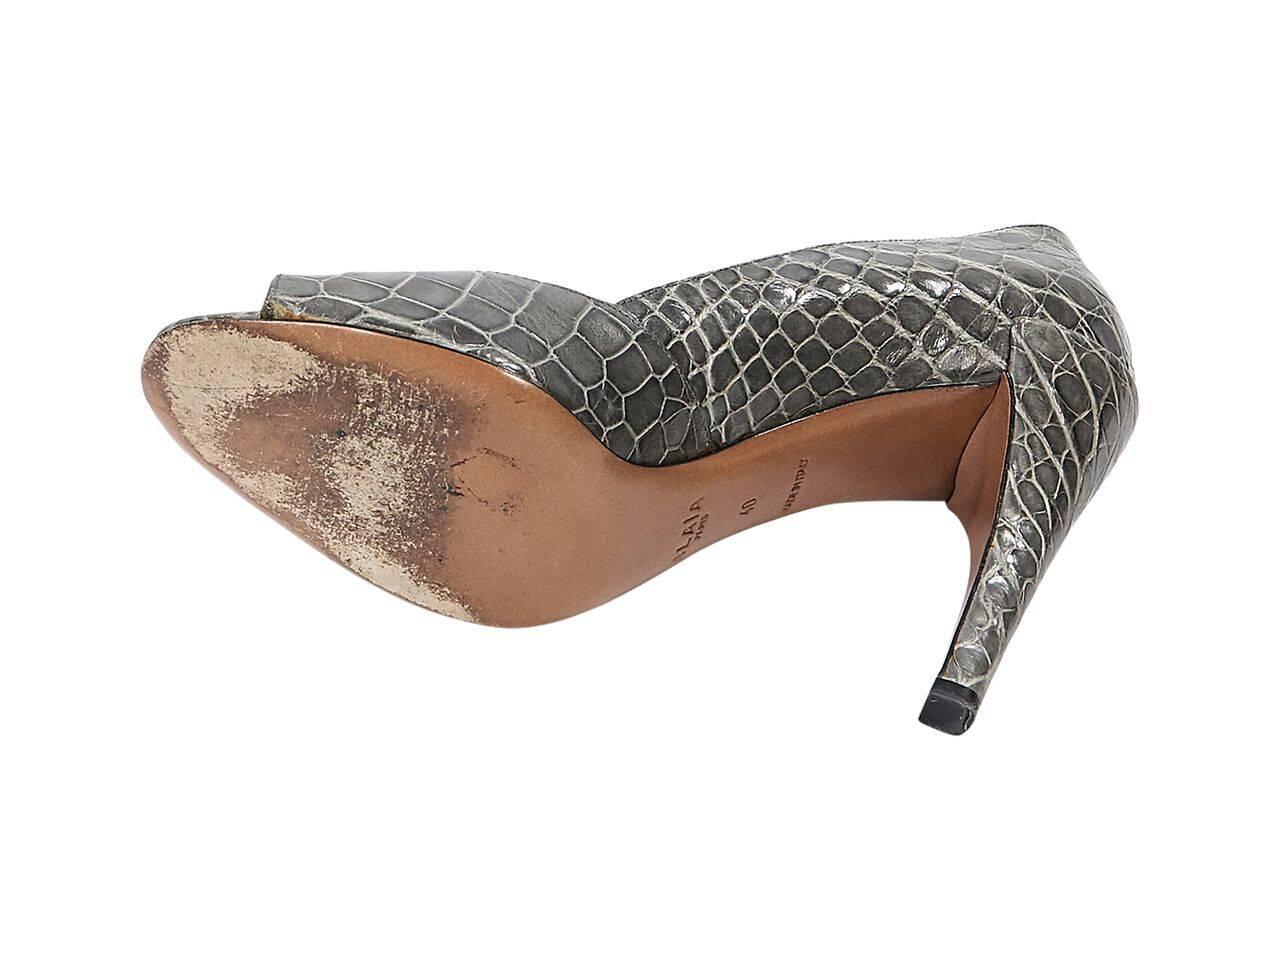 Product details:  Grey crocodile pumps by Alaia.  Peep toe.  Slip-on style. 
Condition: Pre-owned. Very good.  
Est. Retail $1,500.00